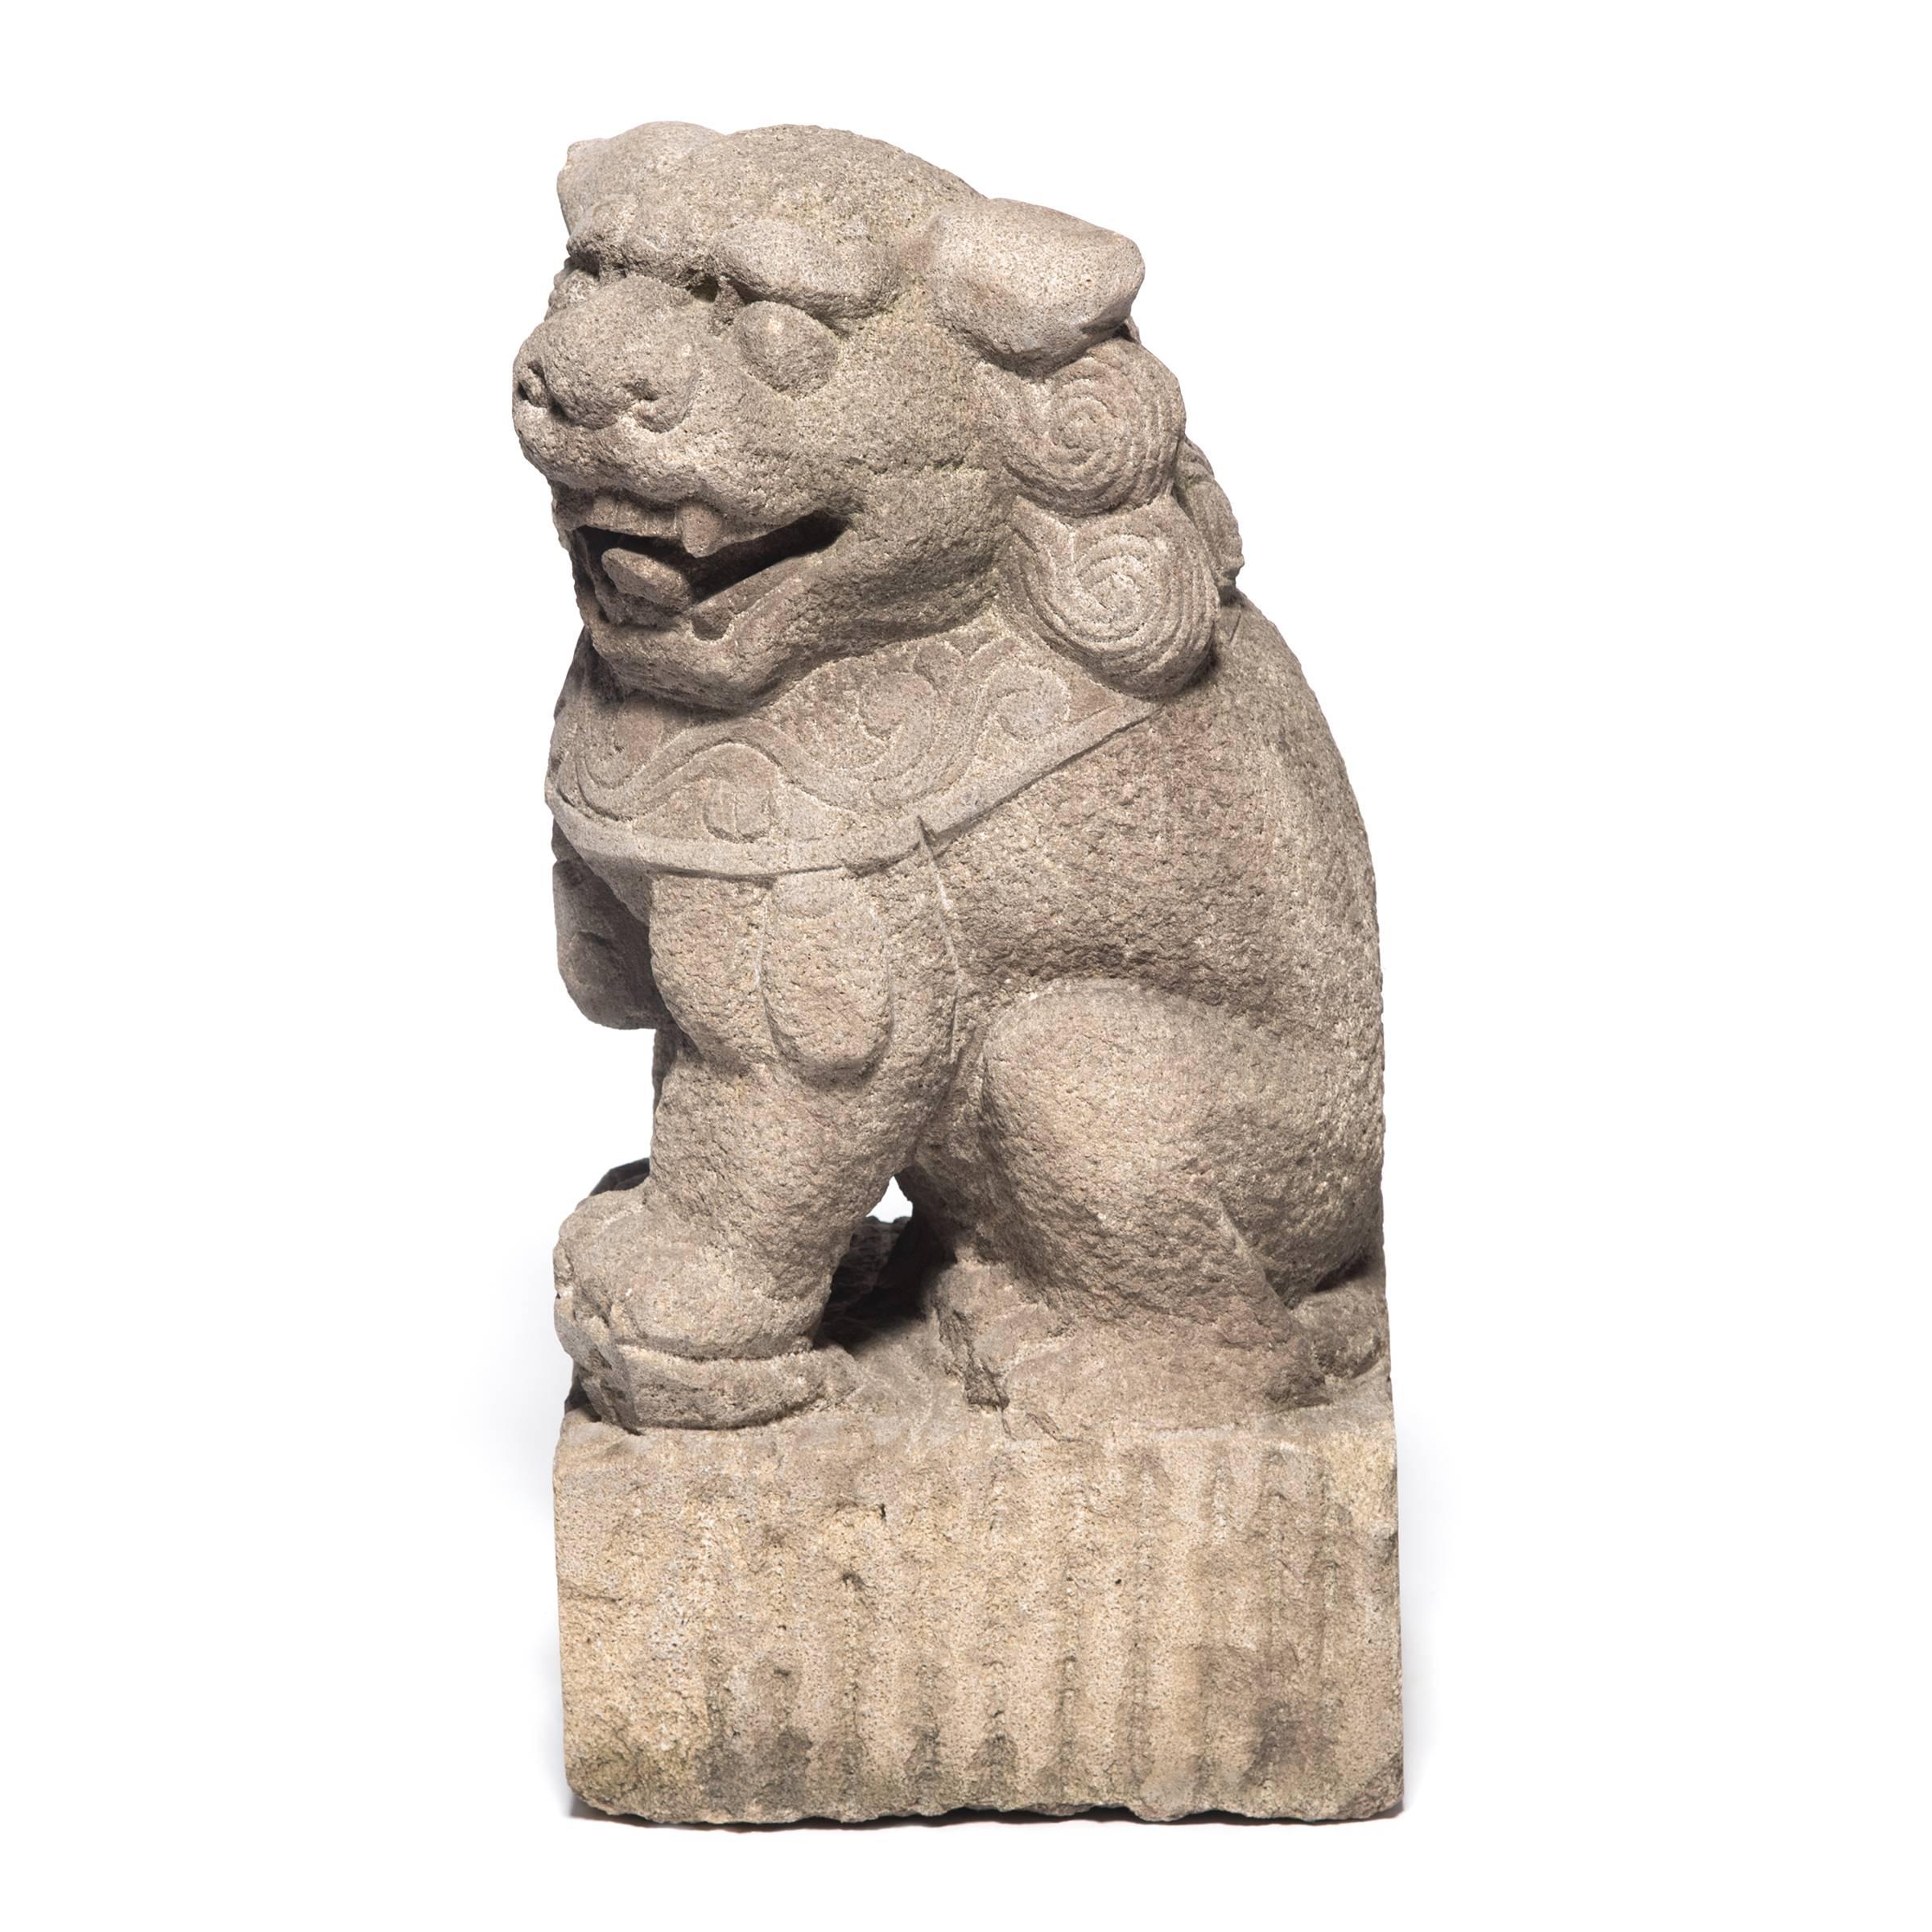 Qing Pair of Chinese Stone Fu Dog Protectors, c. 1850